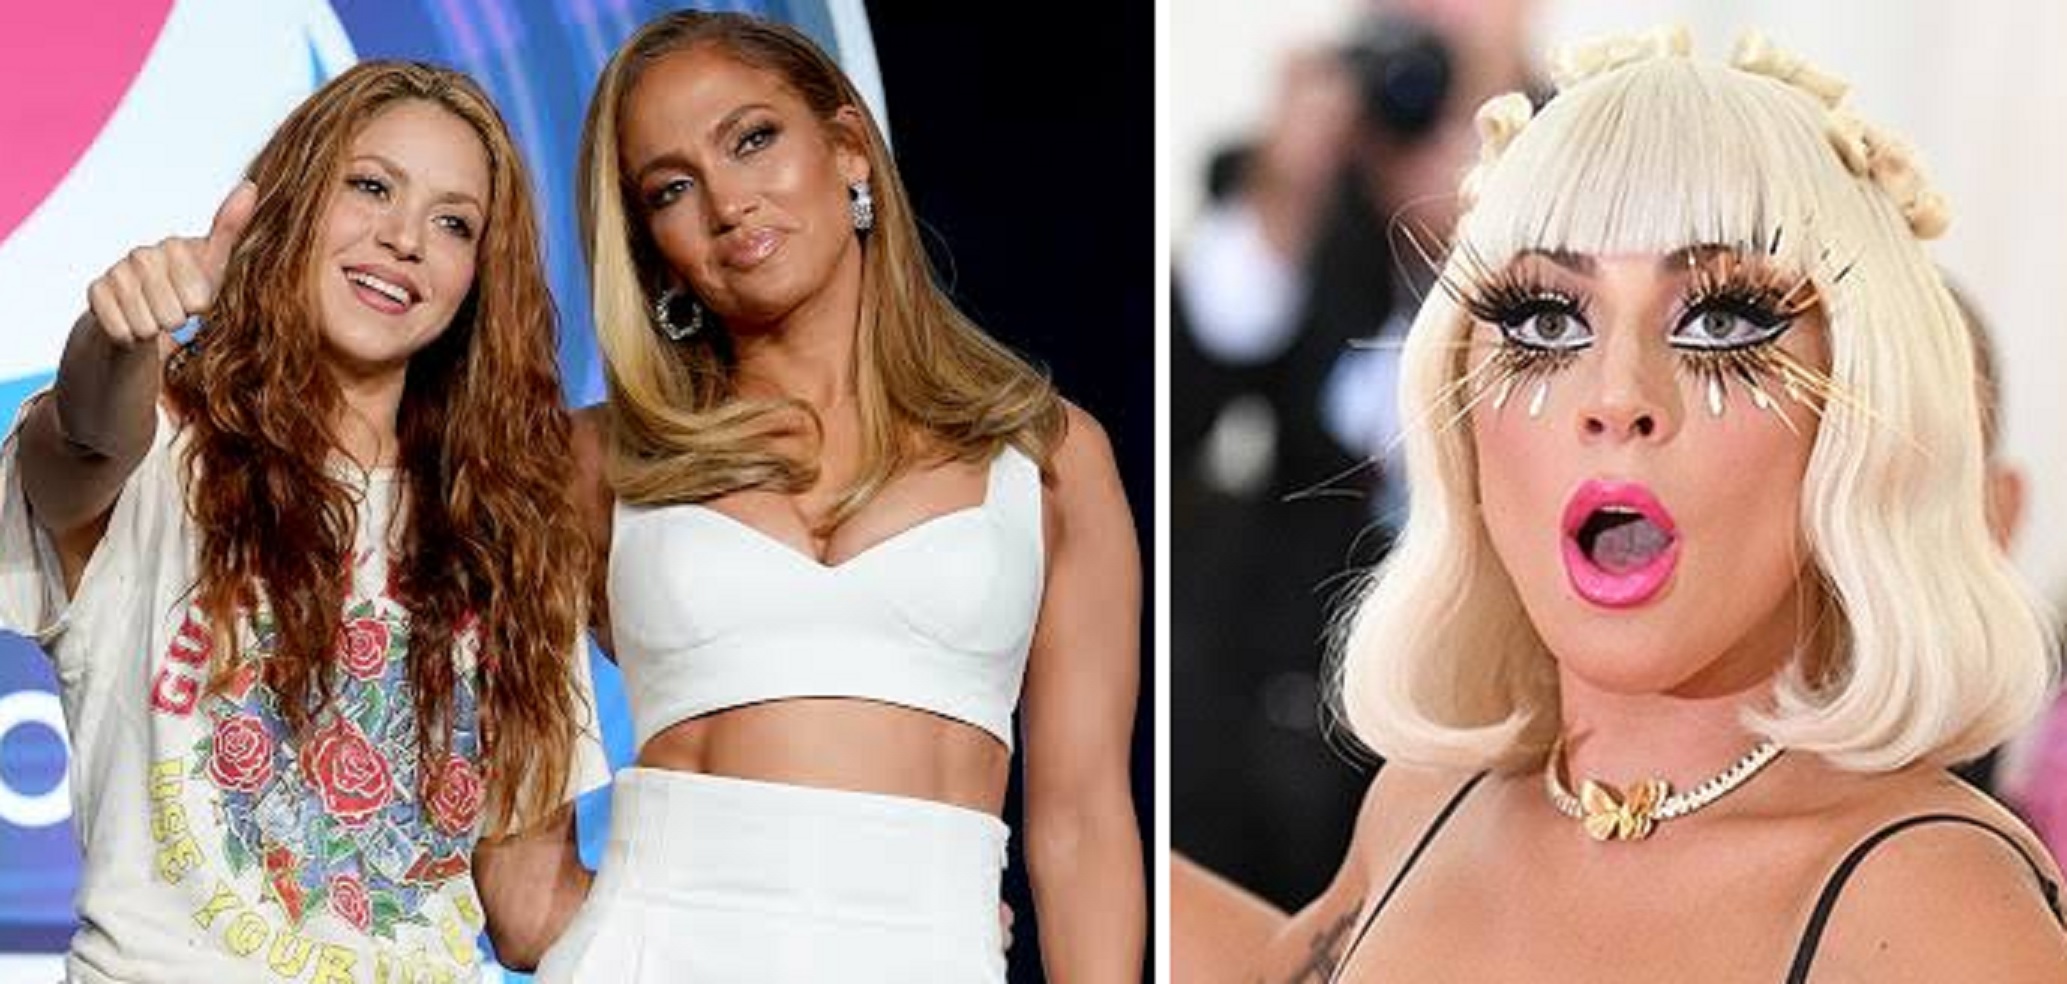 Lady Gaga on JLo and Shakira Super Bowl: There Better Not Be Any Lip-Syncing!